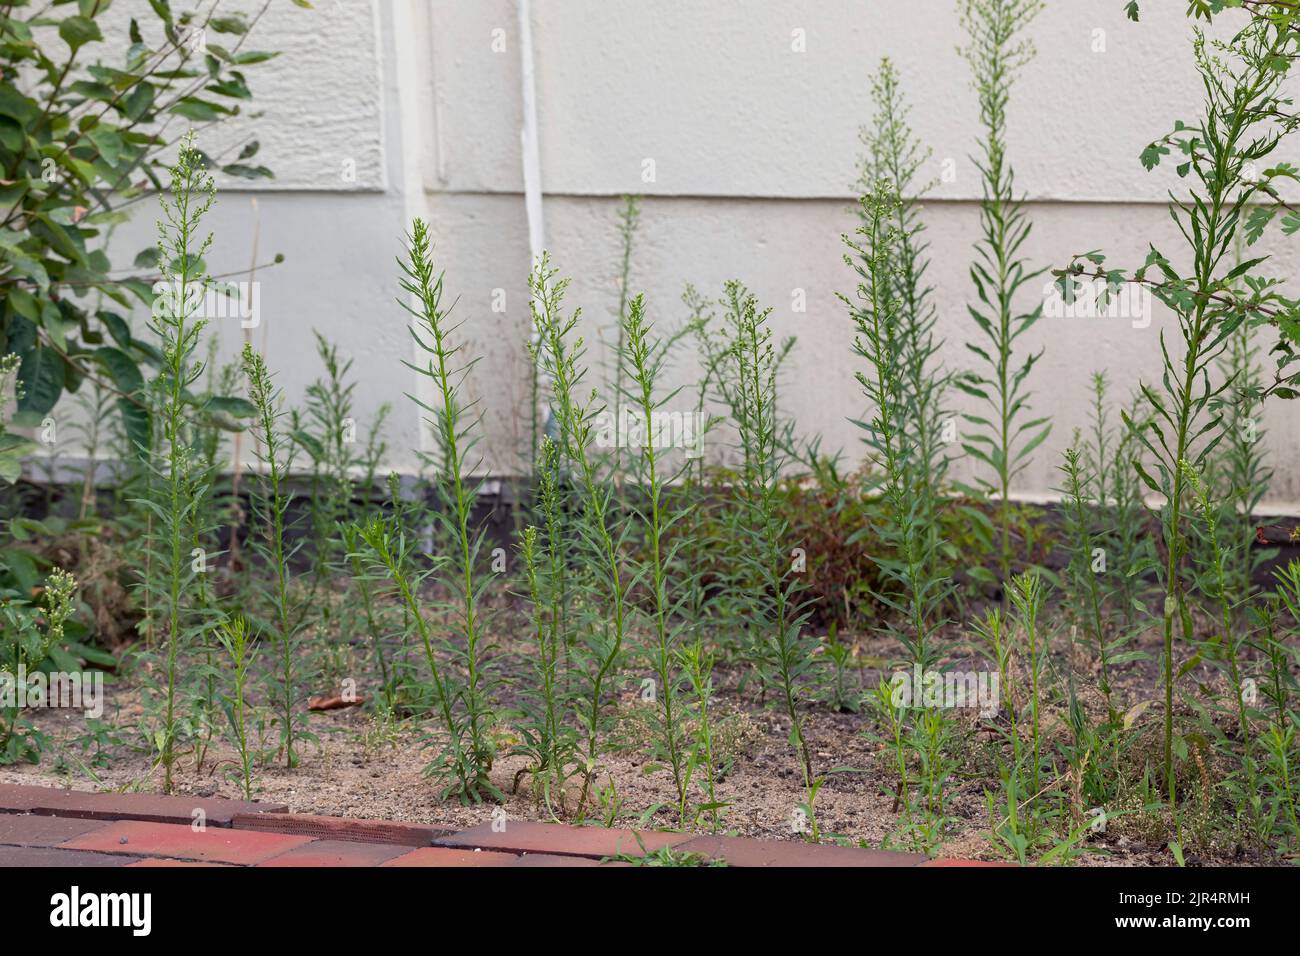 horseweed, Canadian fleabane (Conyza canadensis, Erigeron canadensis), grows on debris field, Germany Stock Photo